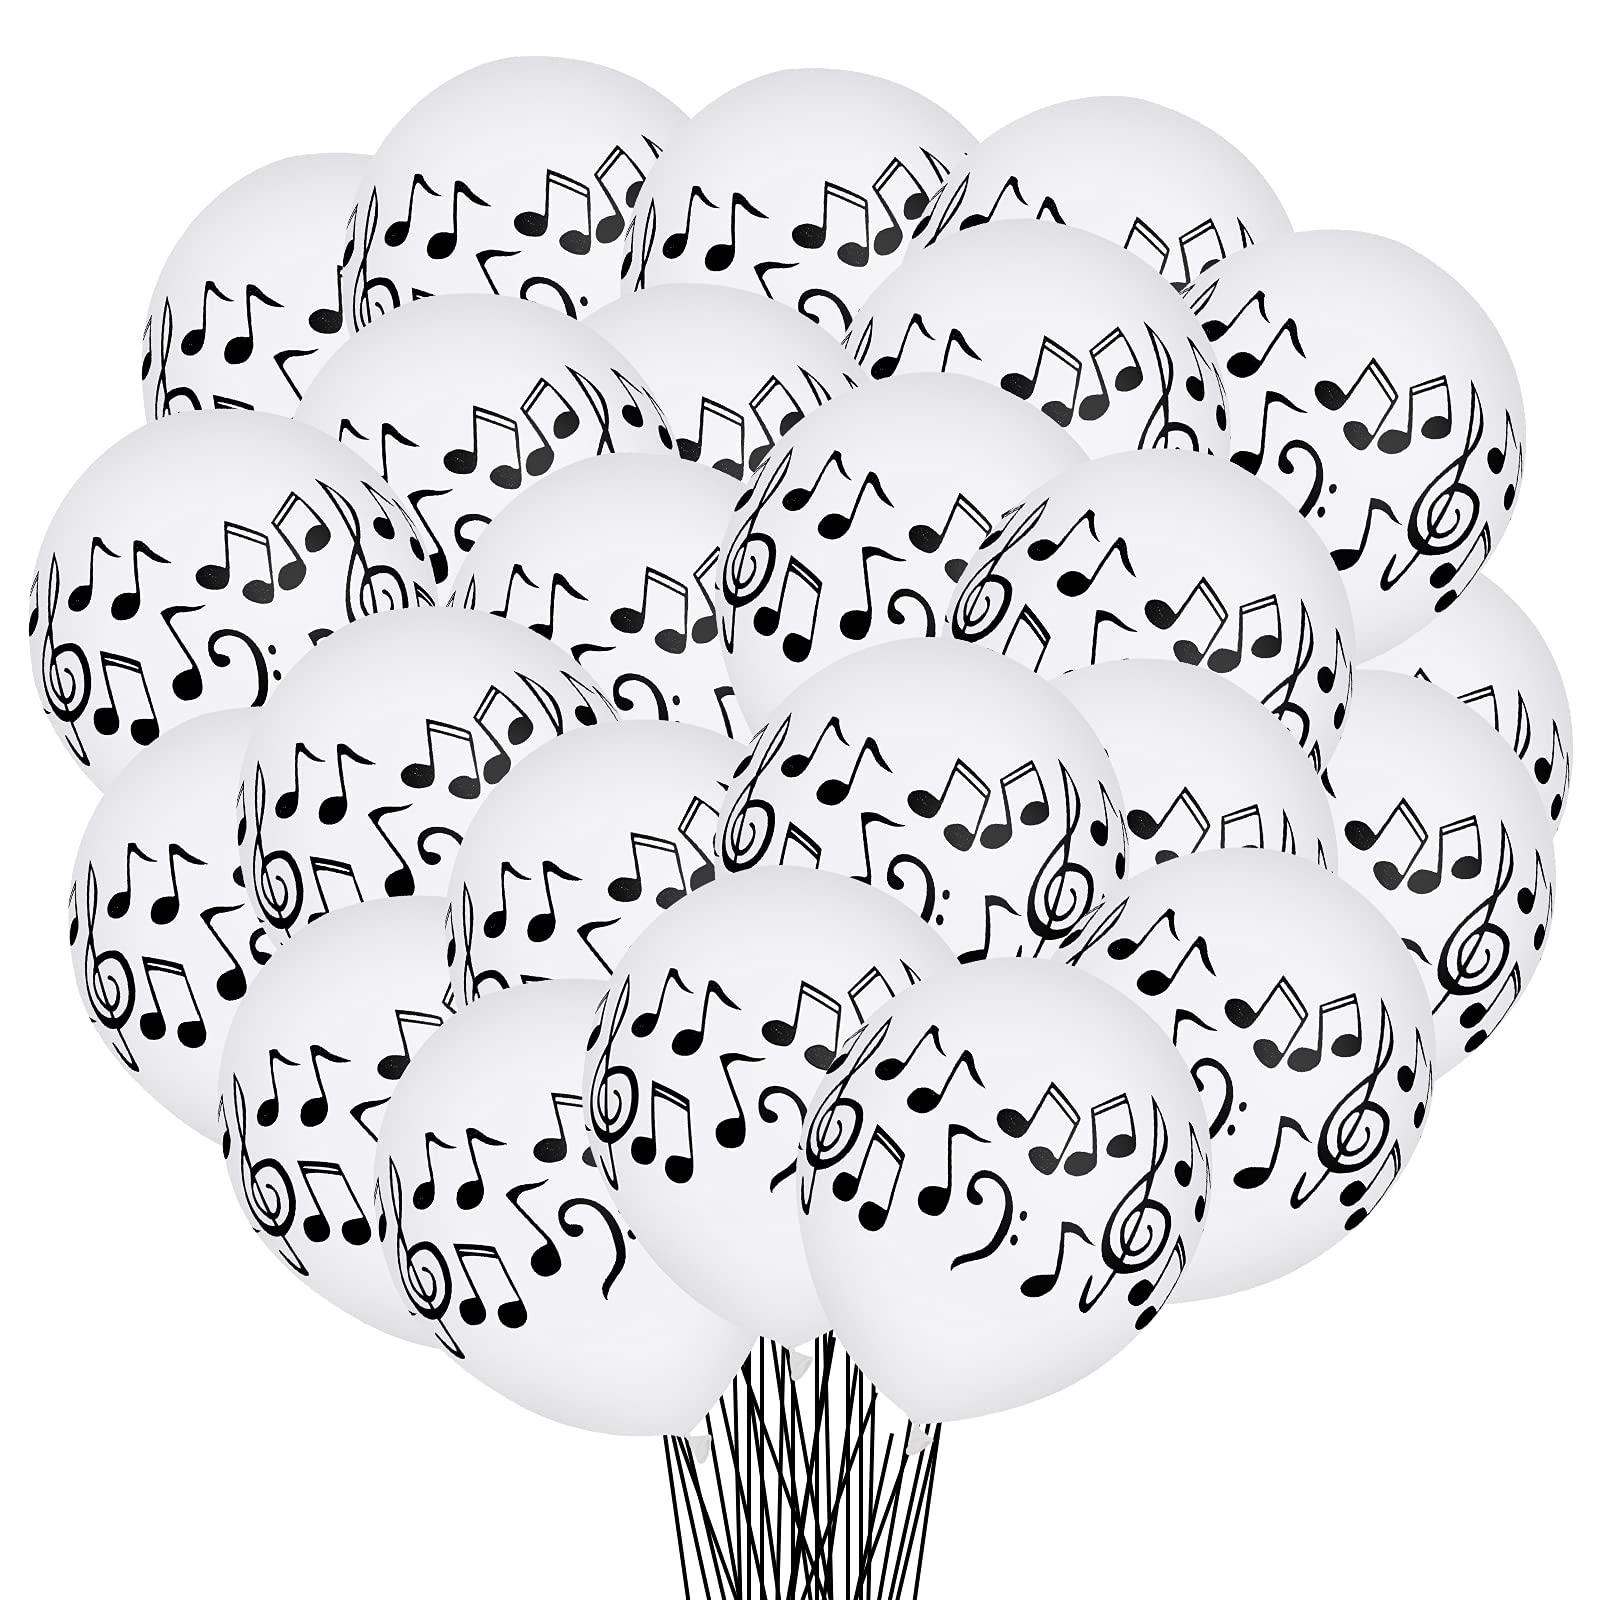 30 Pcs Music Notes Balloons Music Party Decoration Balloons 12 Inches Latex Balloon for Musical Theme Birthday Party Decorations